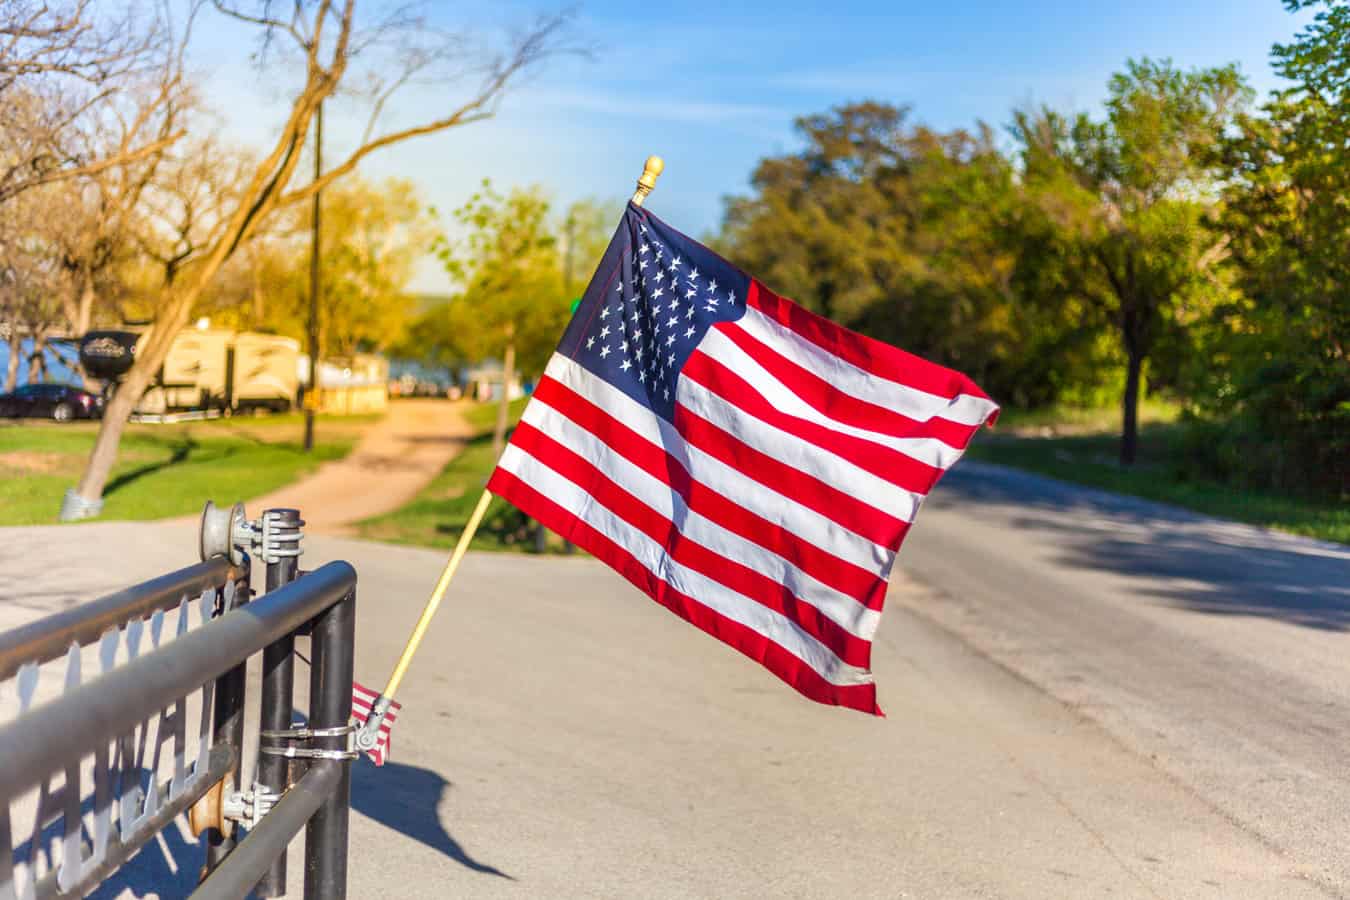 flag waving in front of campground - feature image for RV loans for veterans